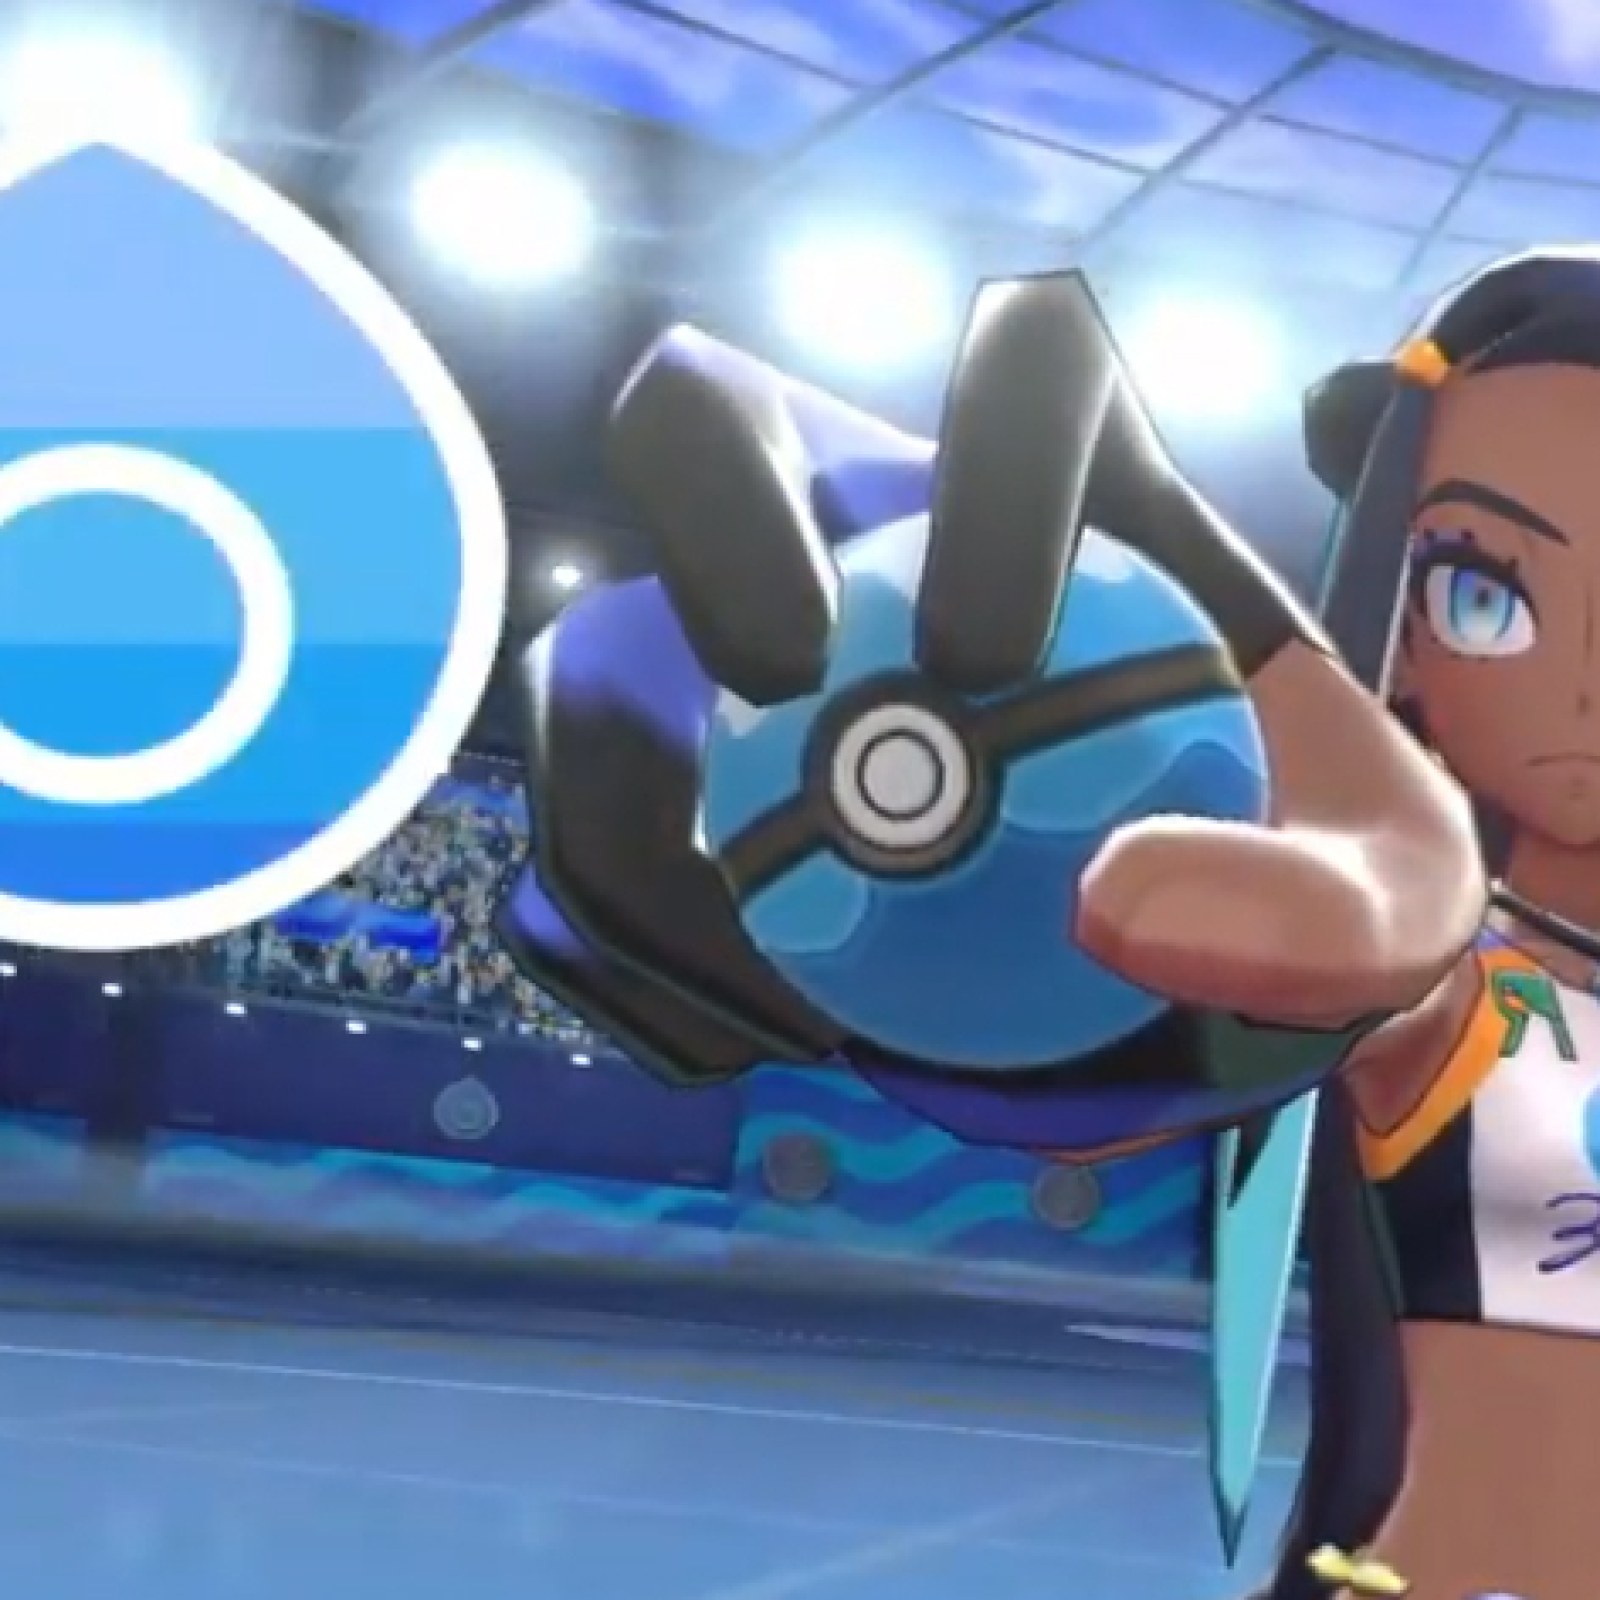 Pokémon Sword And Shield Review Correcting Mistakes Of The